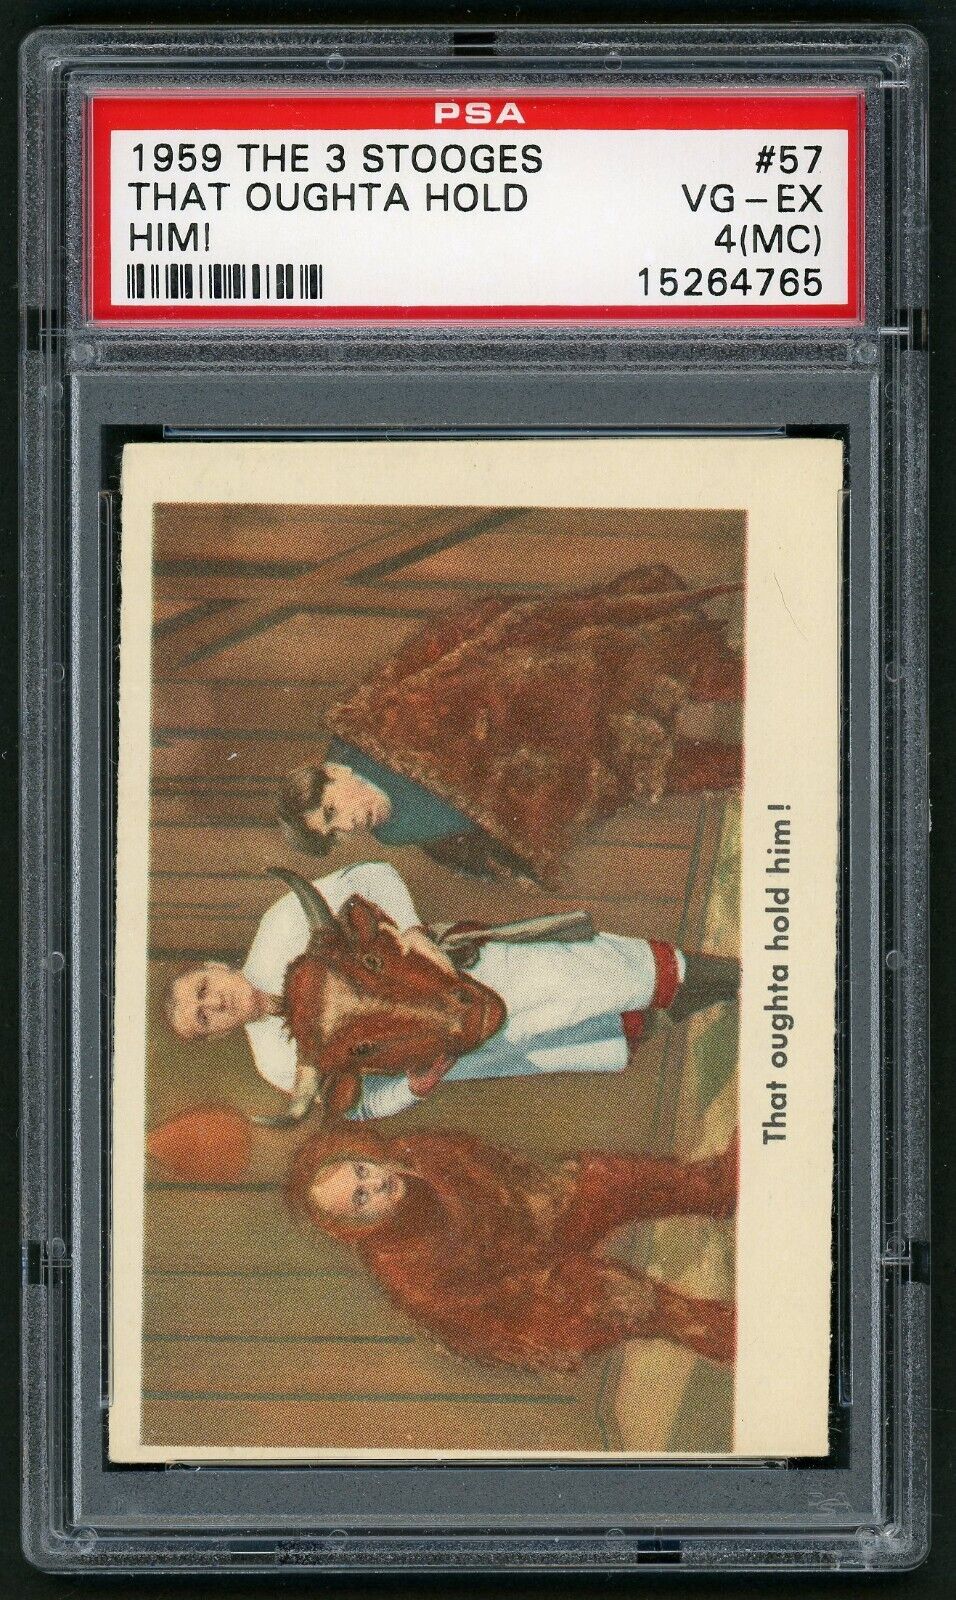 1959 Fleer The Three Stooges Card #57 That Oughta Hold Him PSA 4MC